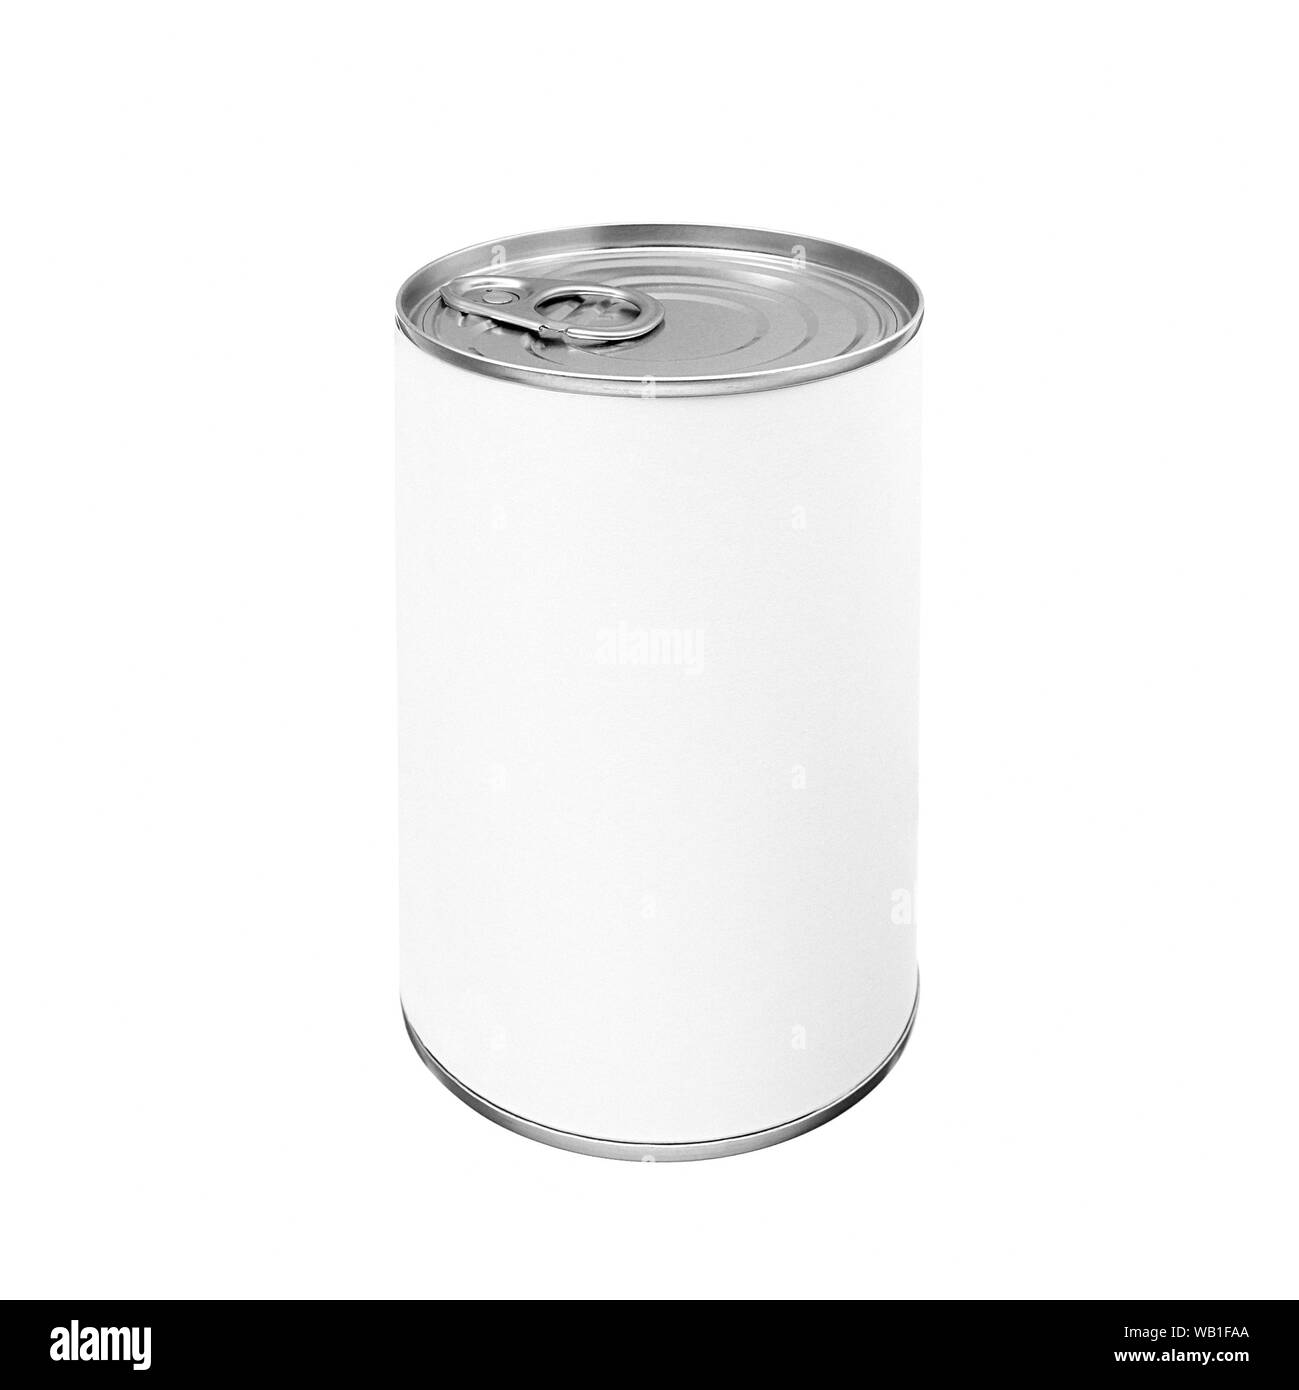 Food tin can mockup with blank white label isolated on white background, front view closeup picture, product packaging with copy space Stock Photo